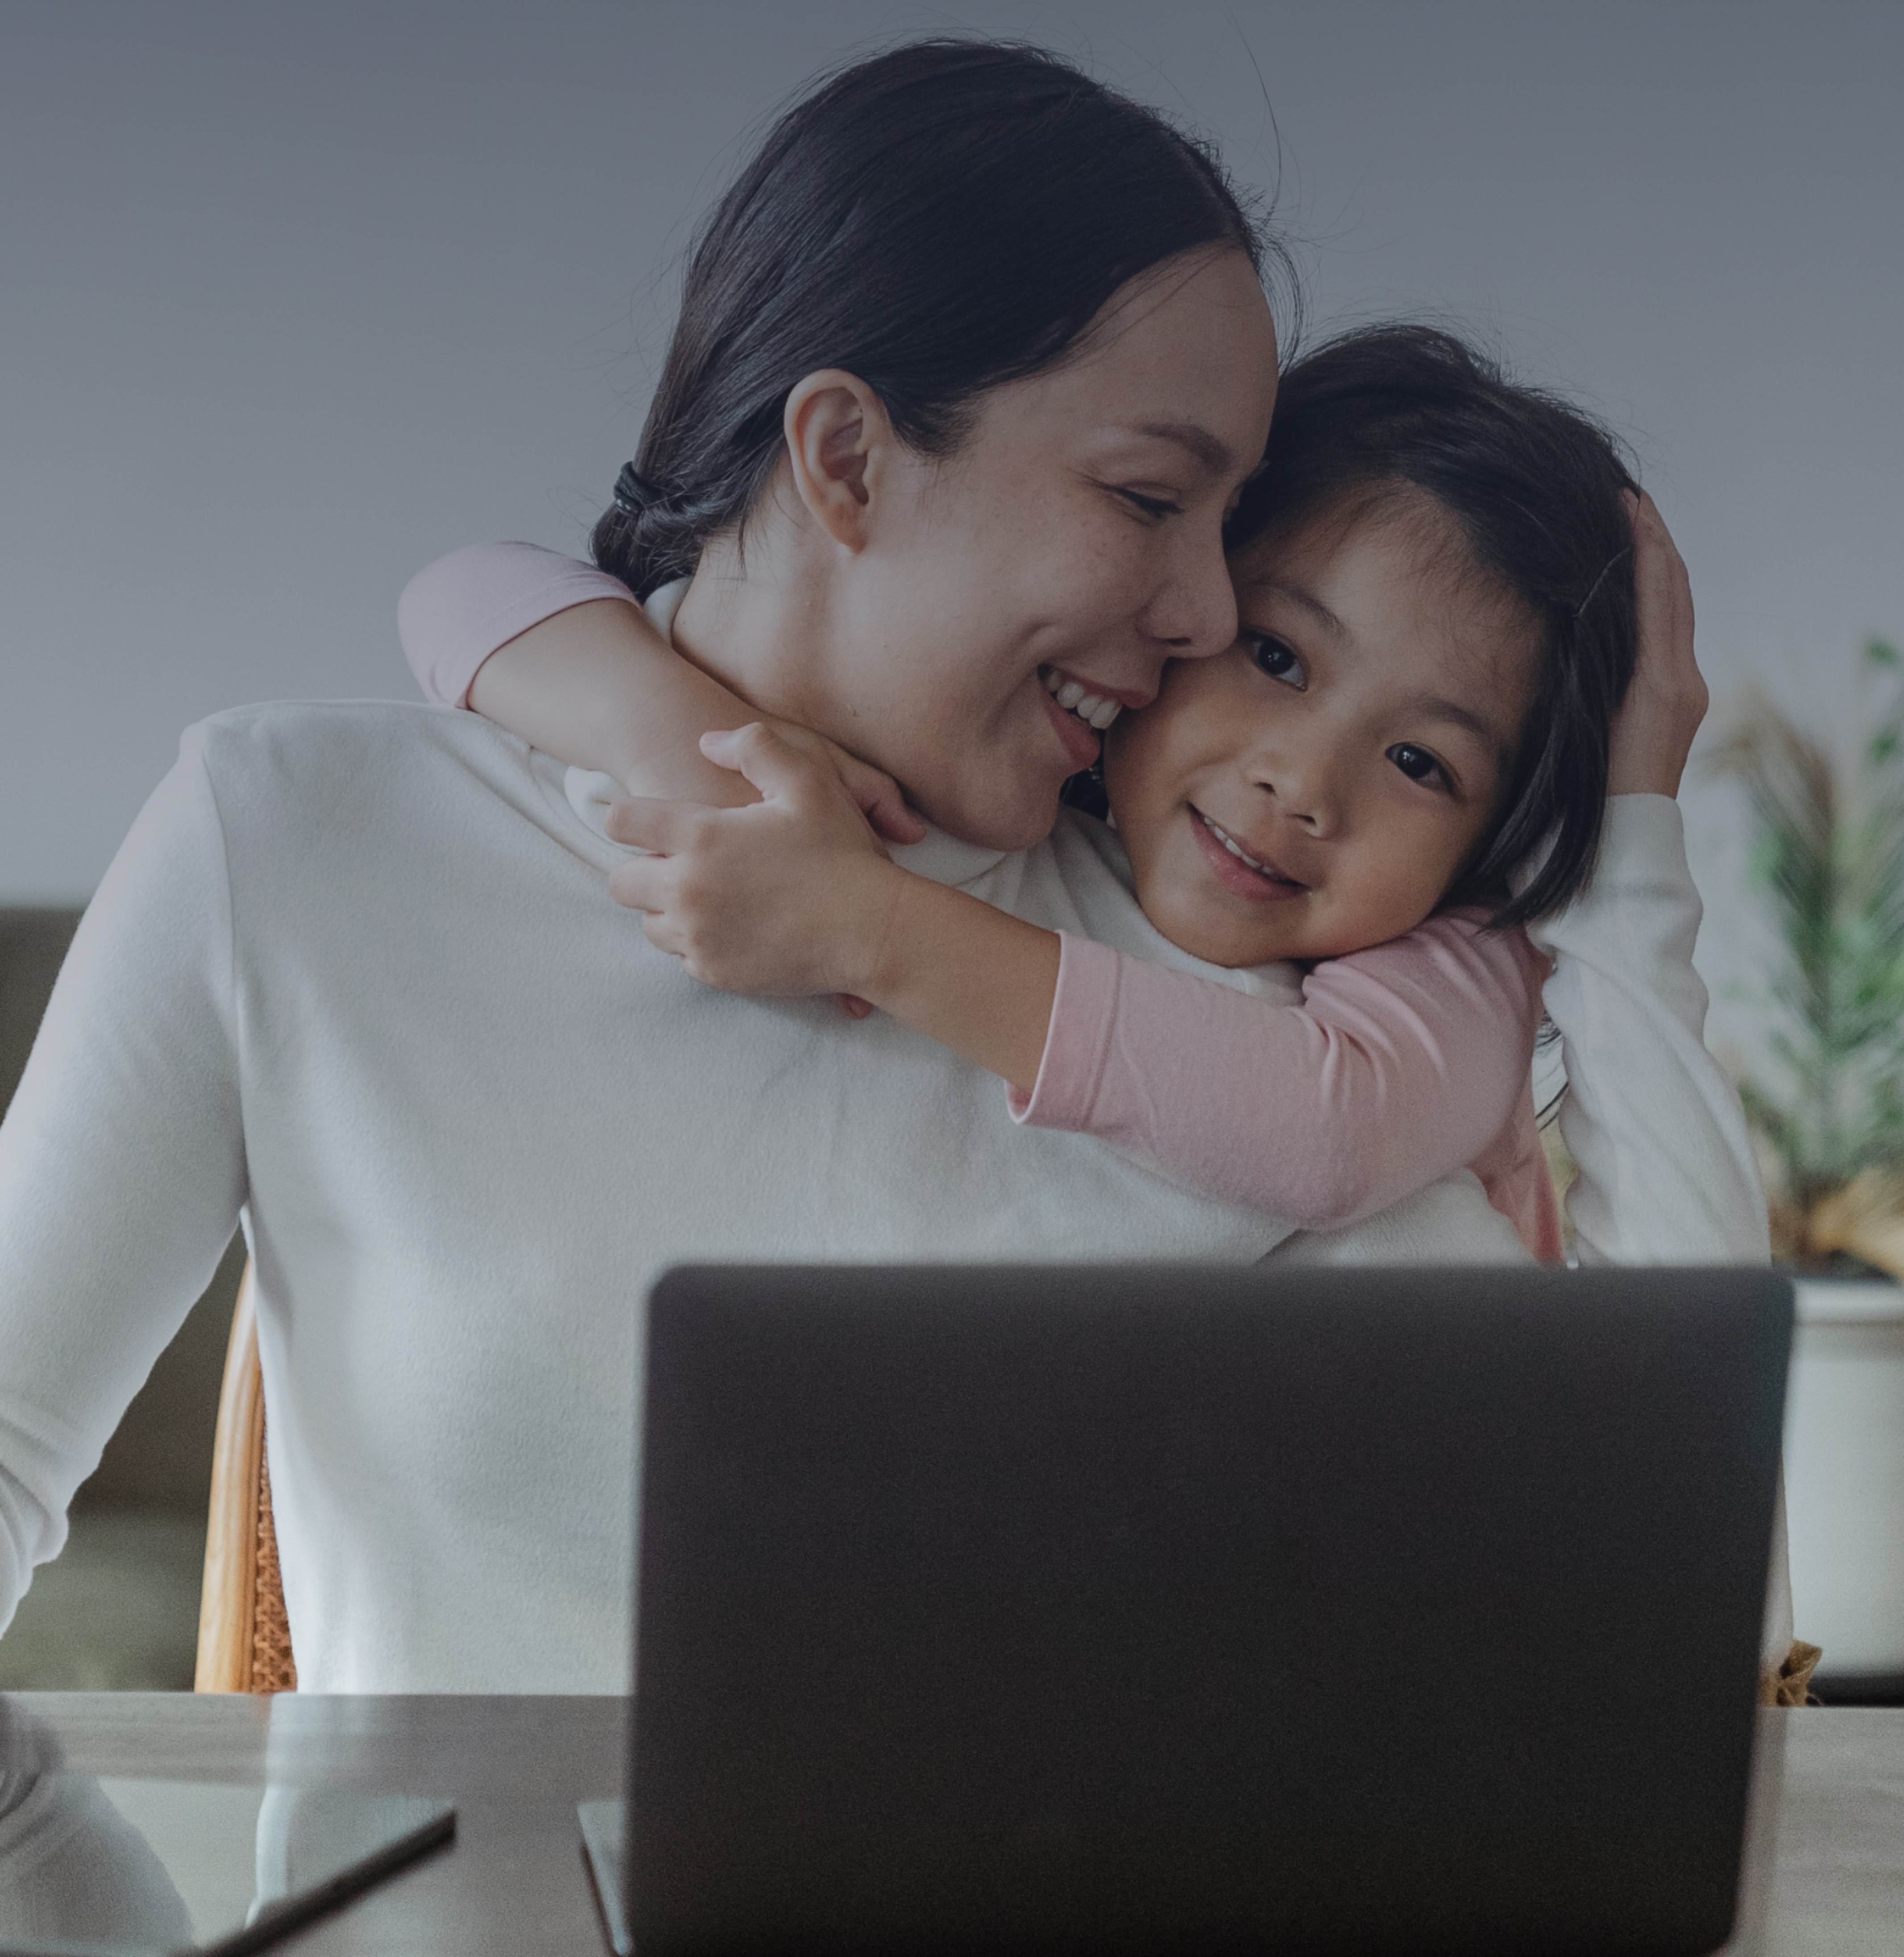 A young girl hugging her mother while she works at a laptop